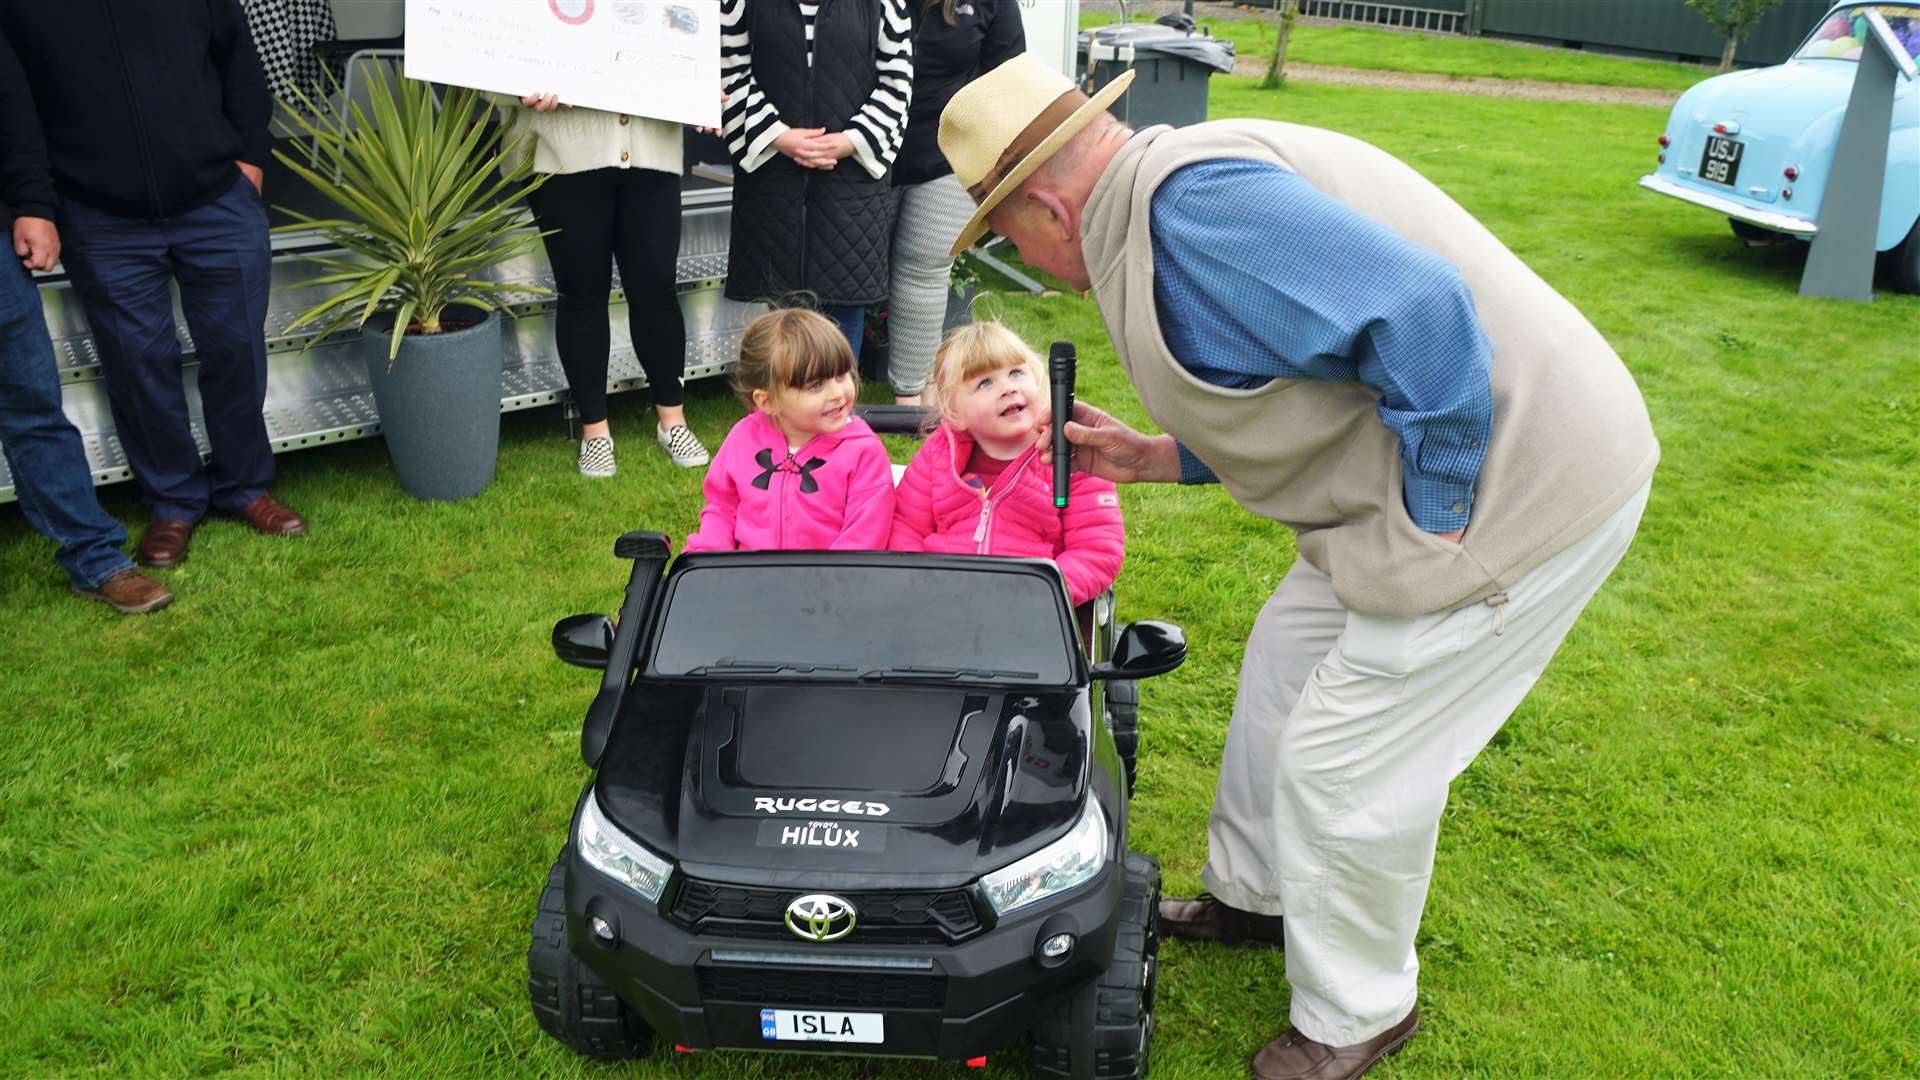 Tony Hagon, compere at the event, interviews two young drivers Isla Green and Isla Campbell. Picture: DGS